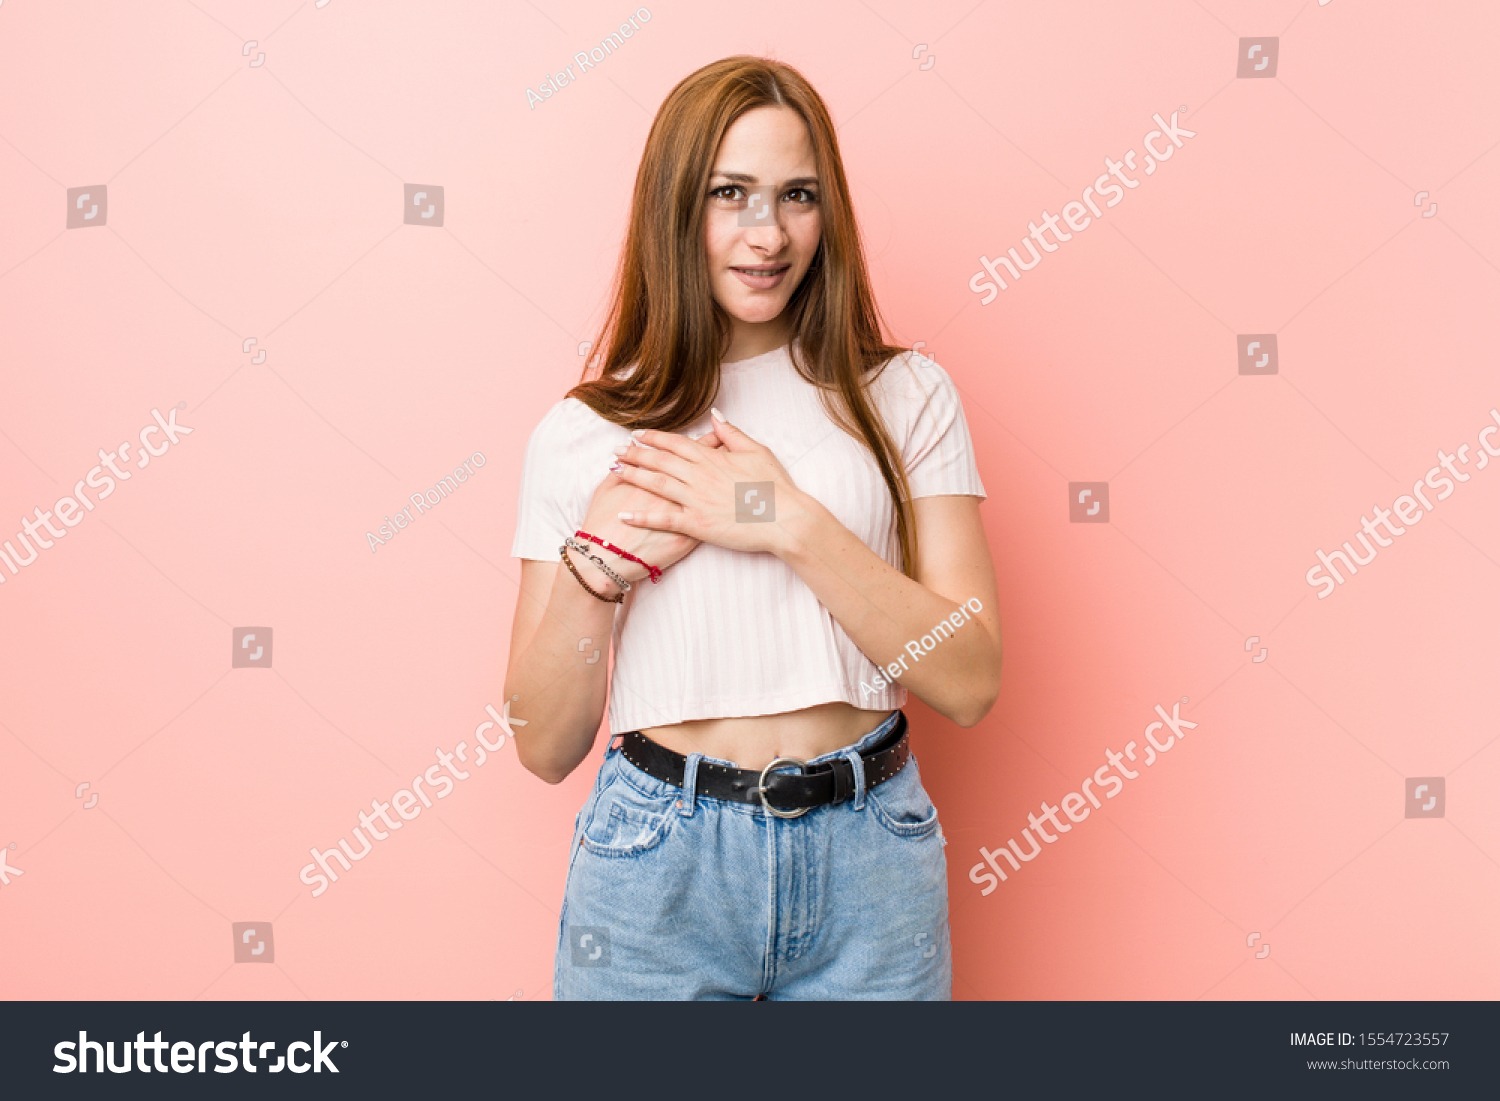 Young redhead ginger woman against a pink wall has friendly expression, pressing palm to chest. Love concept. #1554723557